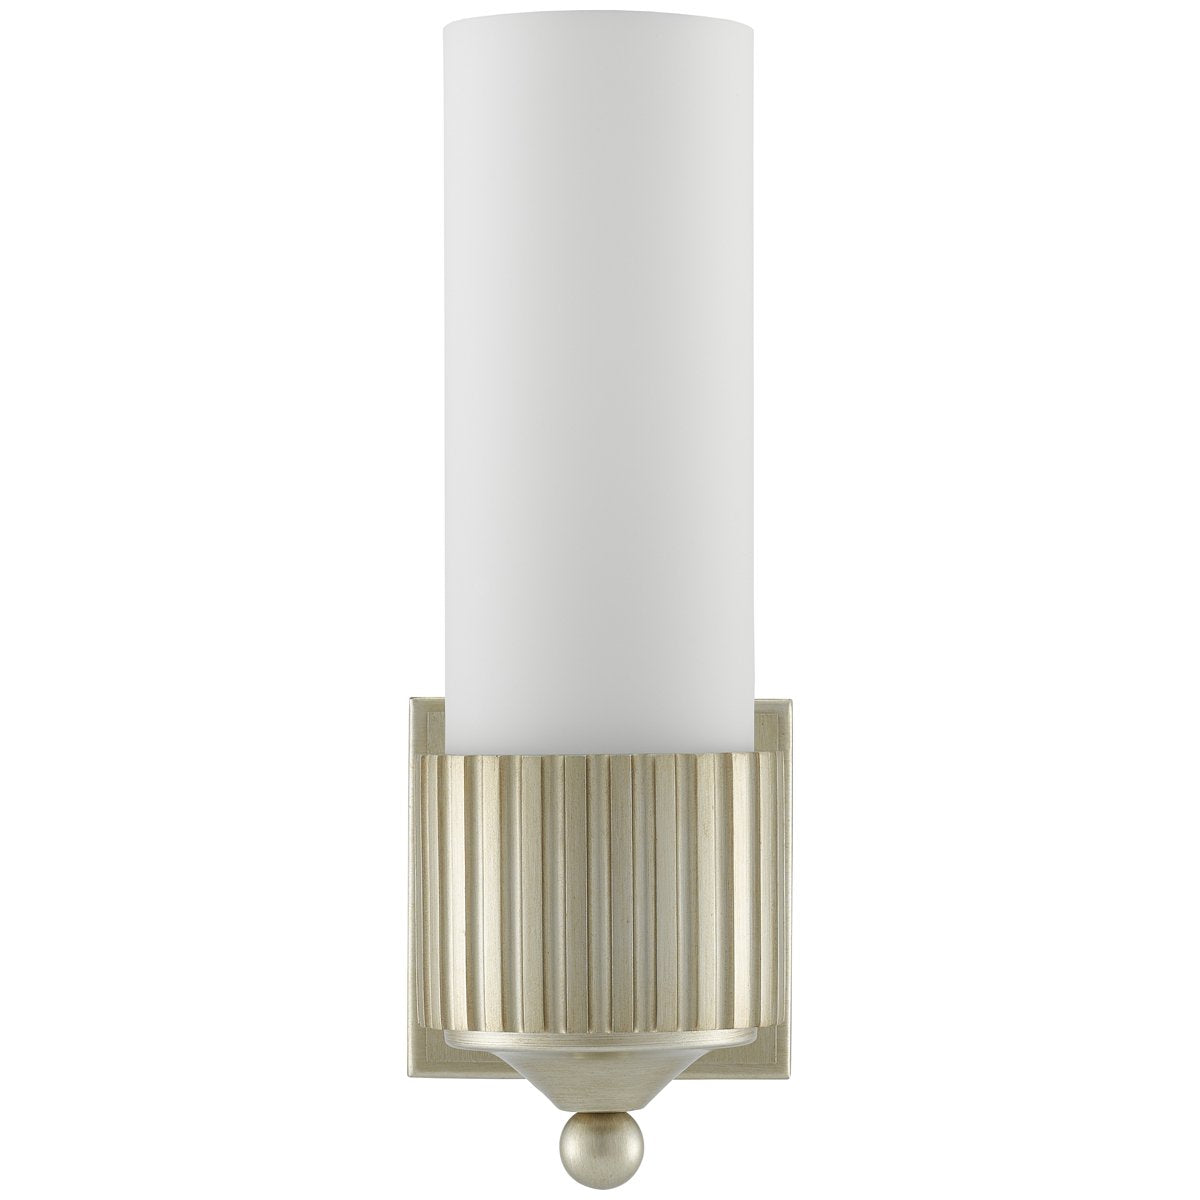 Currey and Company Bryce Wall Sconce